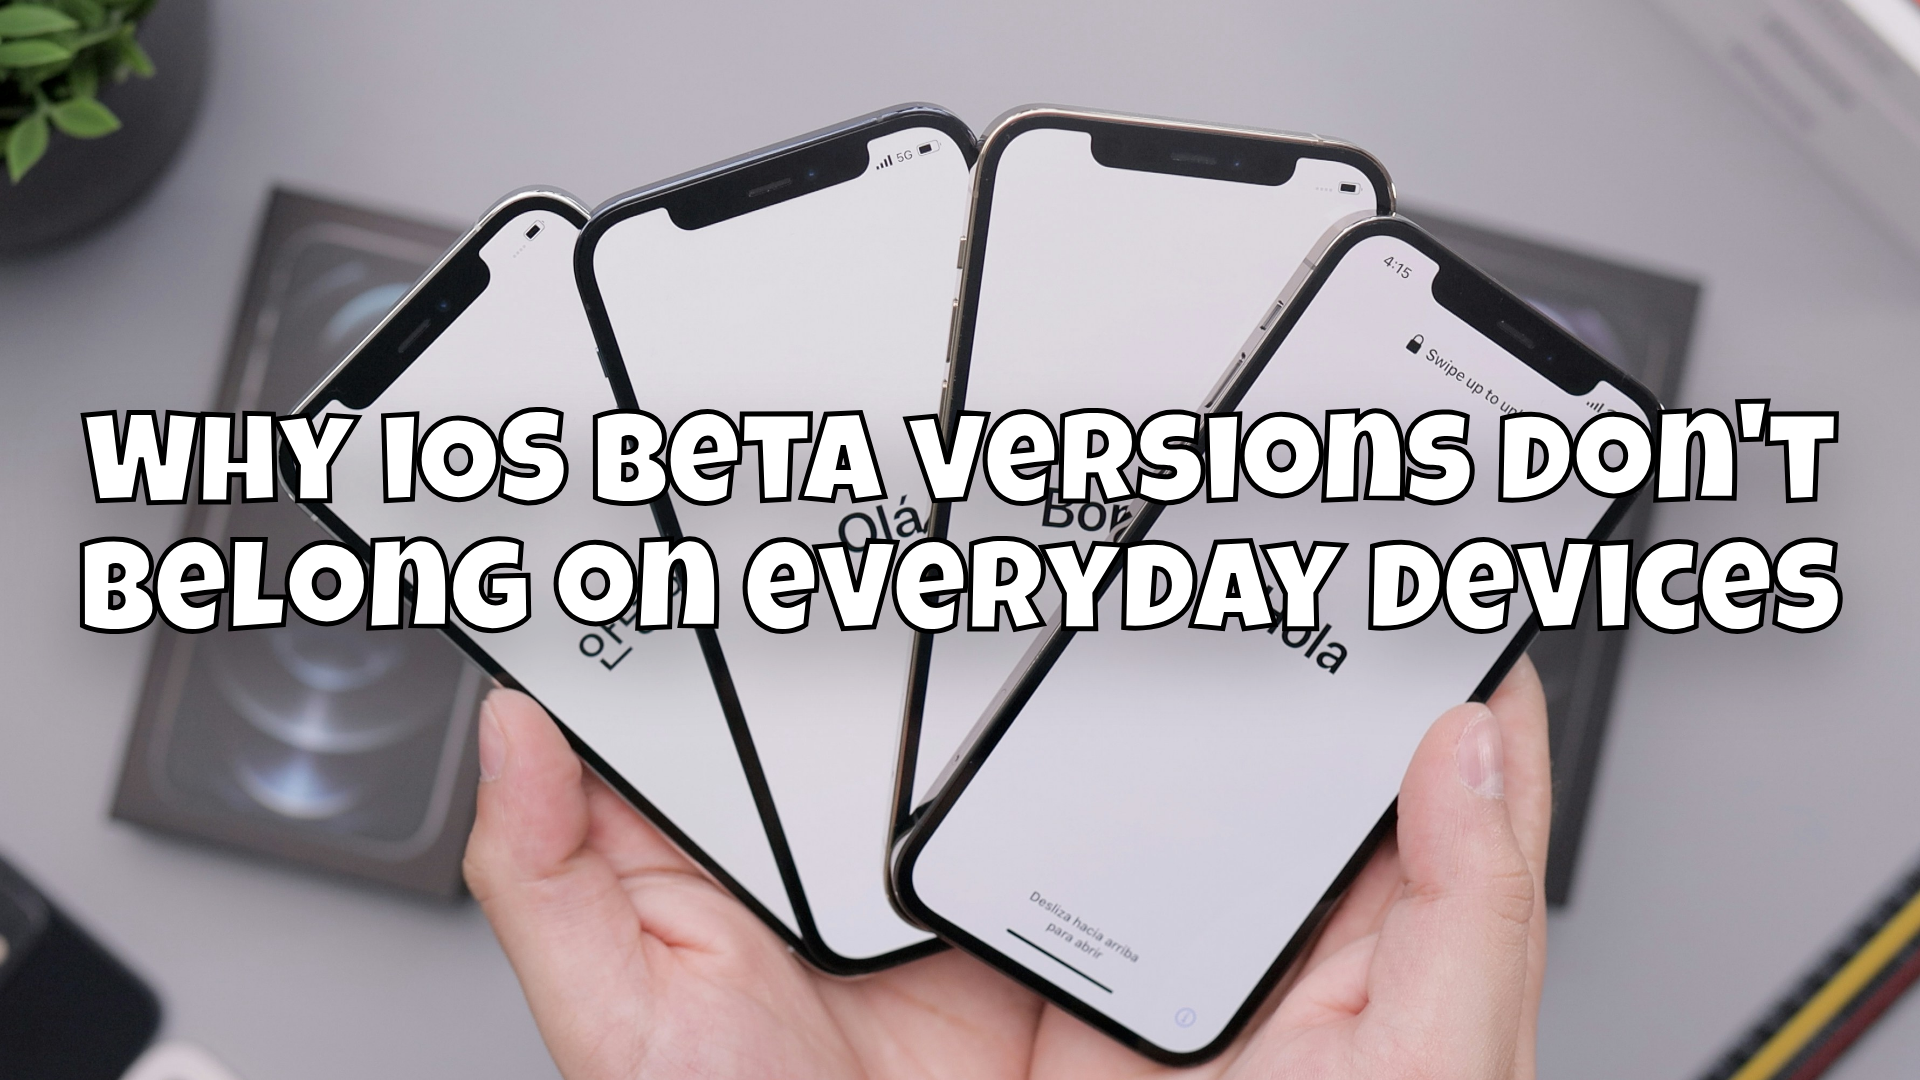 Why iOS beta versions don't belong on everyday devices